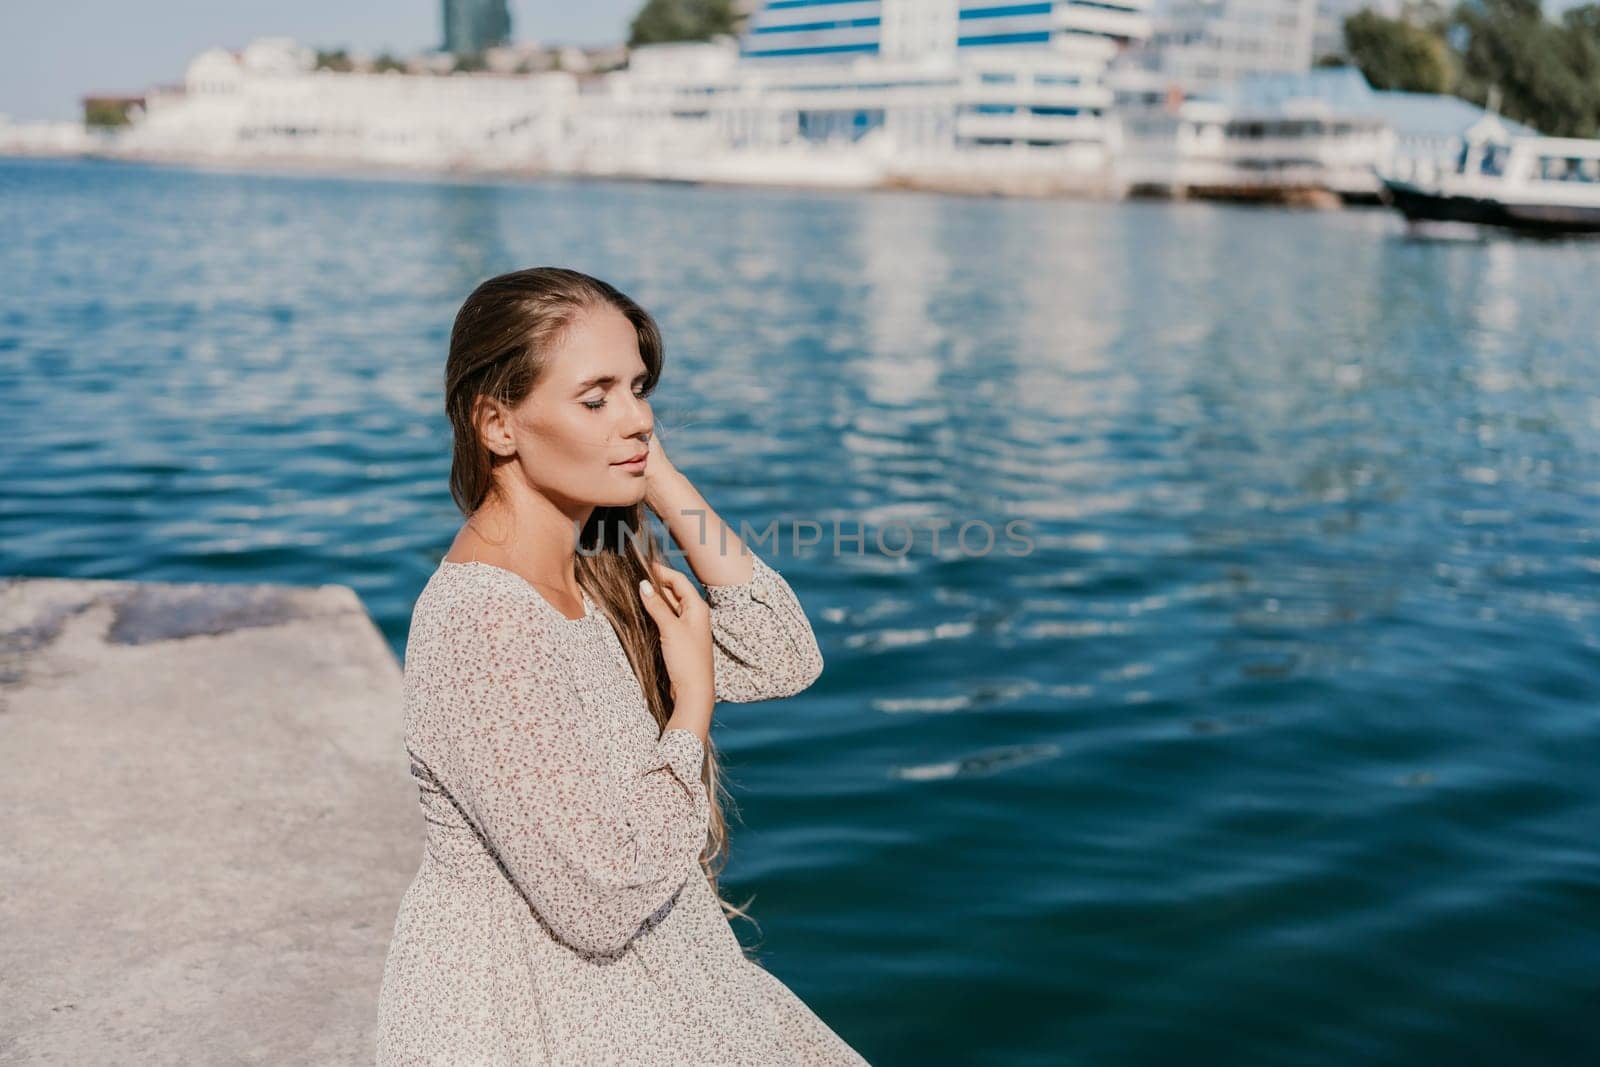 A woman is sitting in the water wearing a white dress. The water is calm and blue. The woman is enjoying the moment and taking in the beauty of the scene. by Matiunina